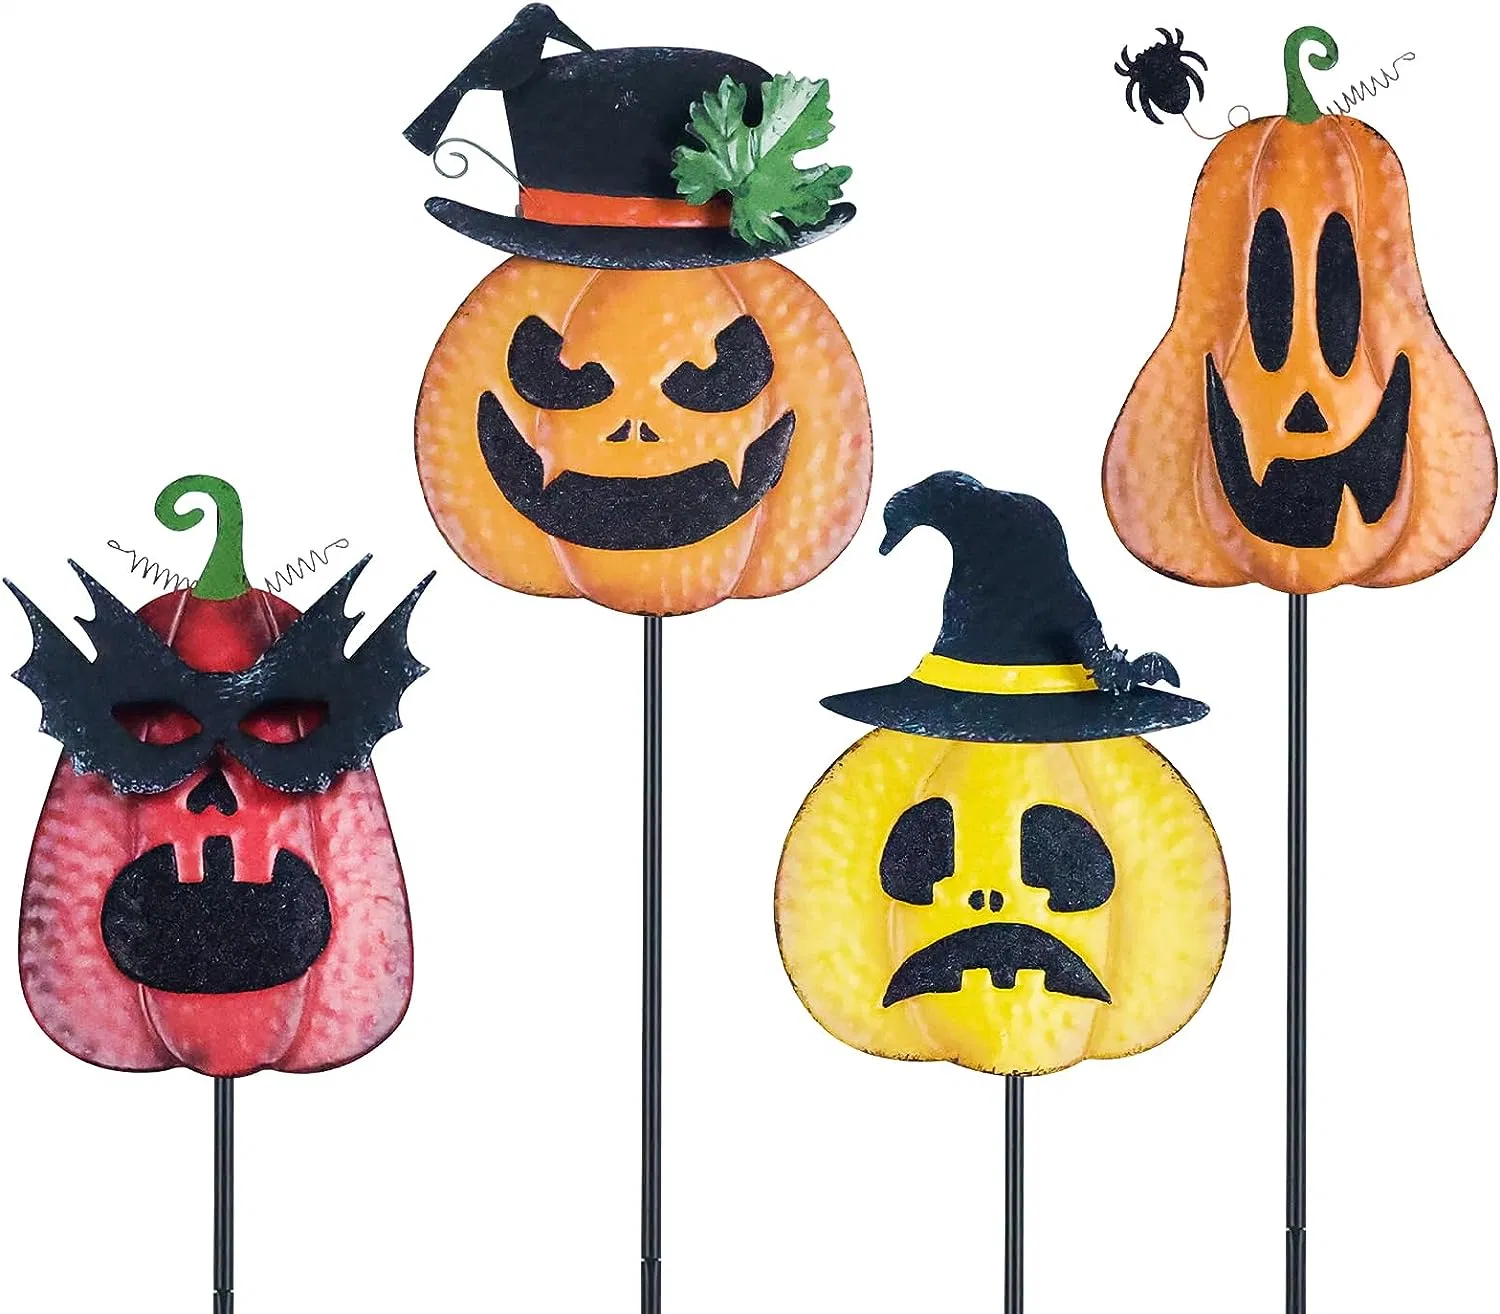 Metal Pumpkin Garden Stakes with Witch's Hat Crow Halloween Decorations for Home, Jack O Lantern Metal Yard Signs for Garden Lawn Patio Halloween Decor